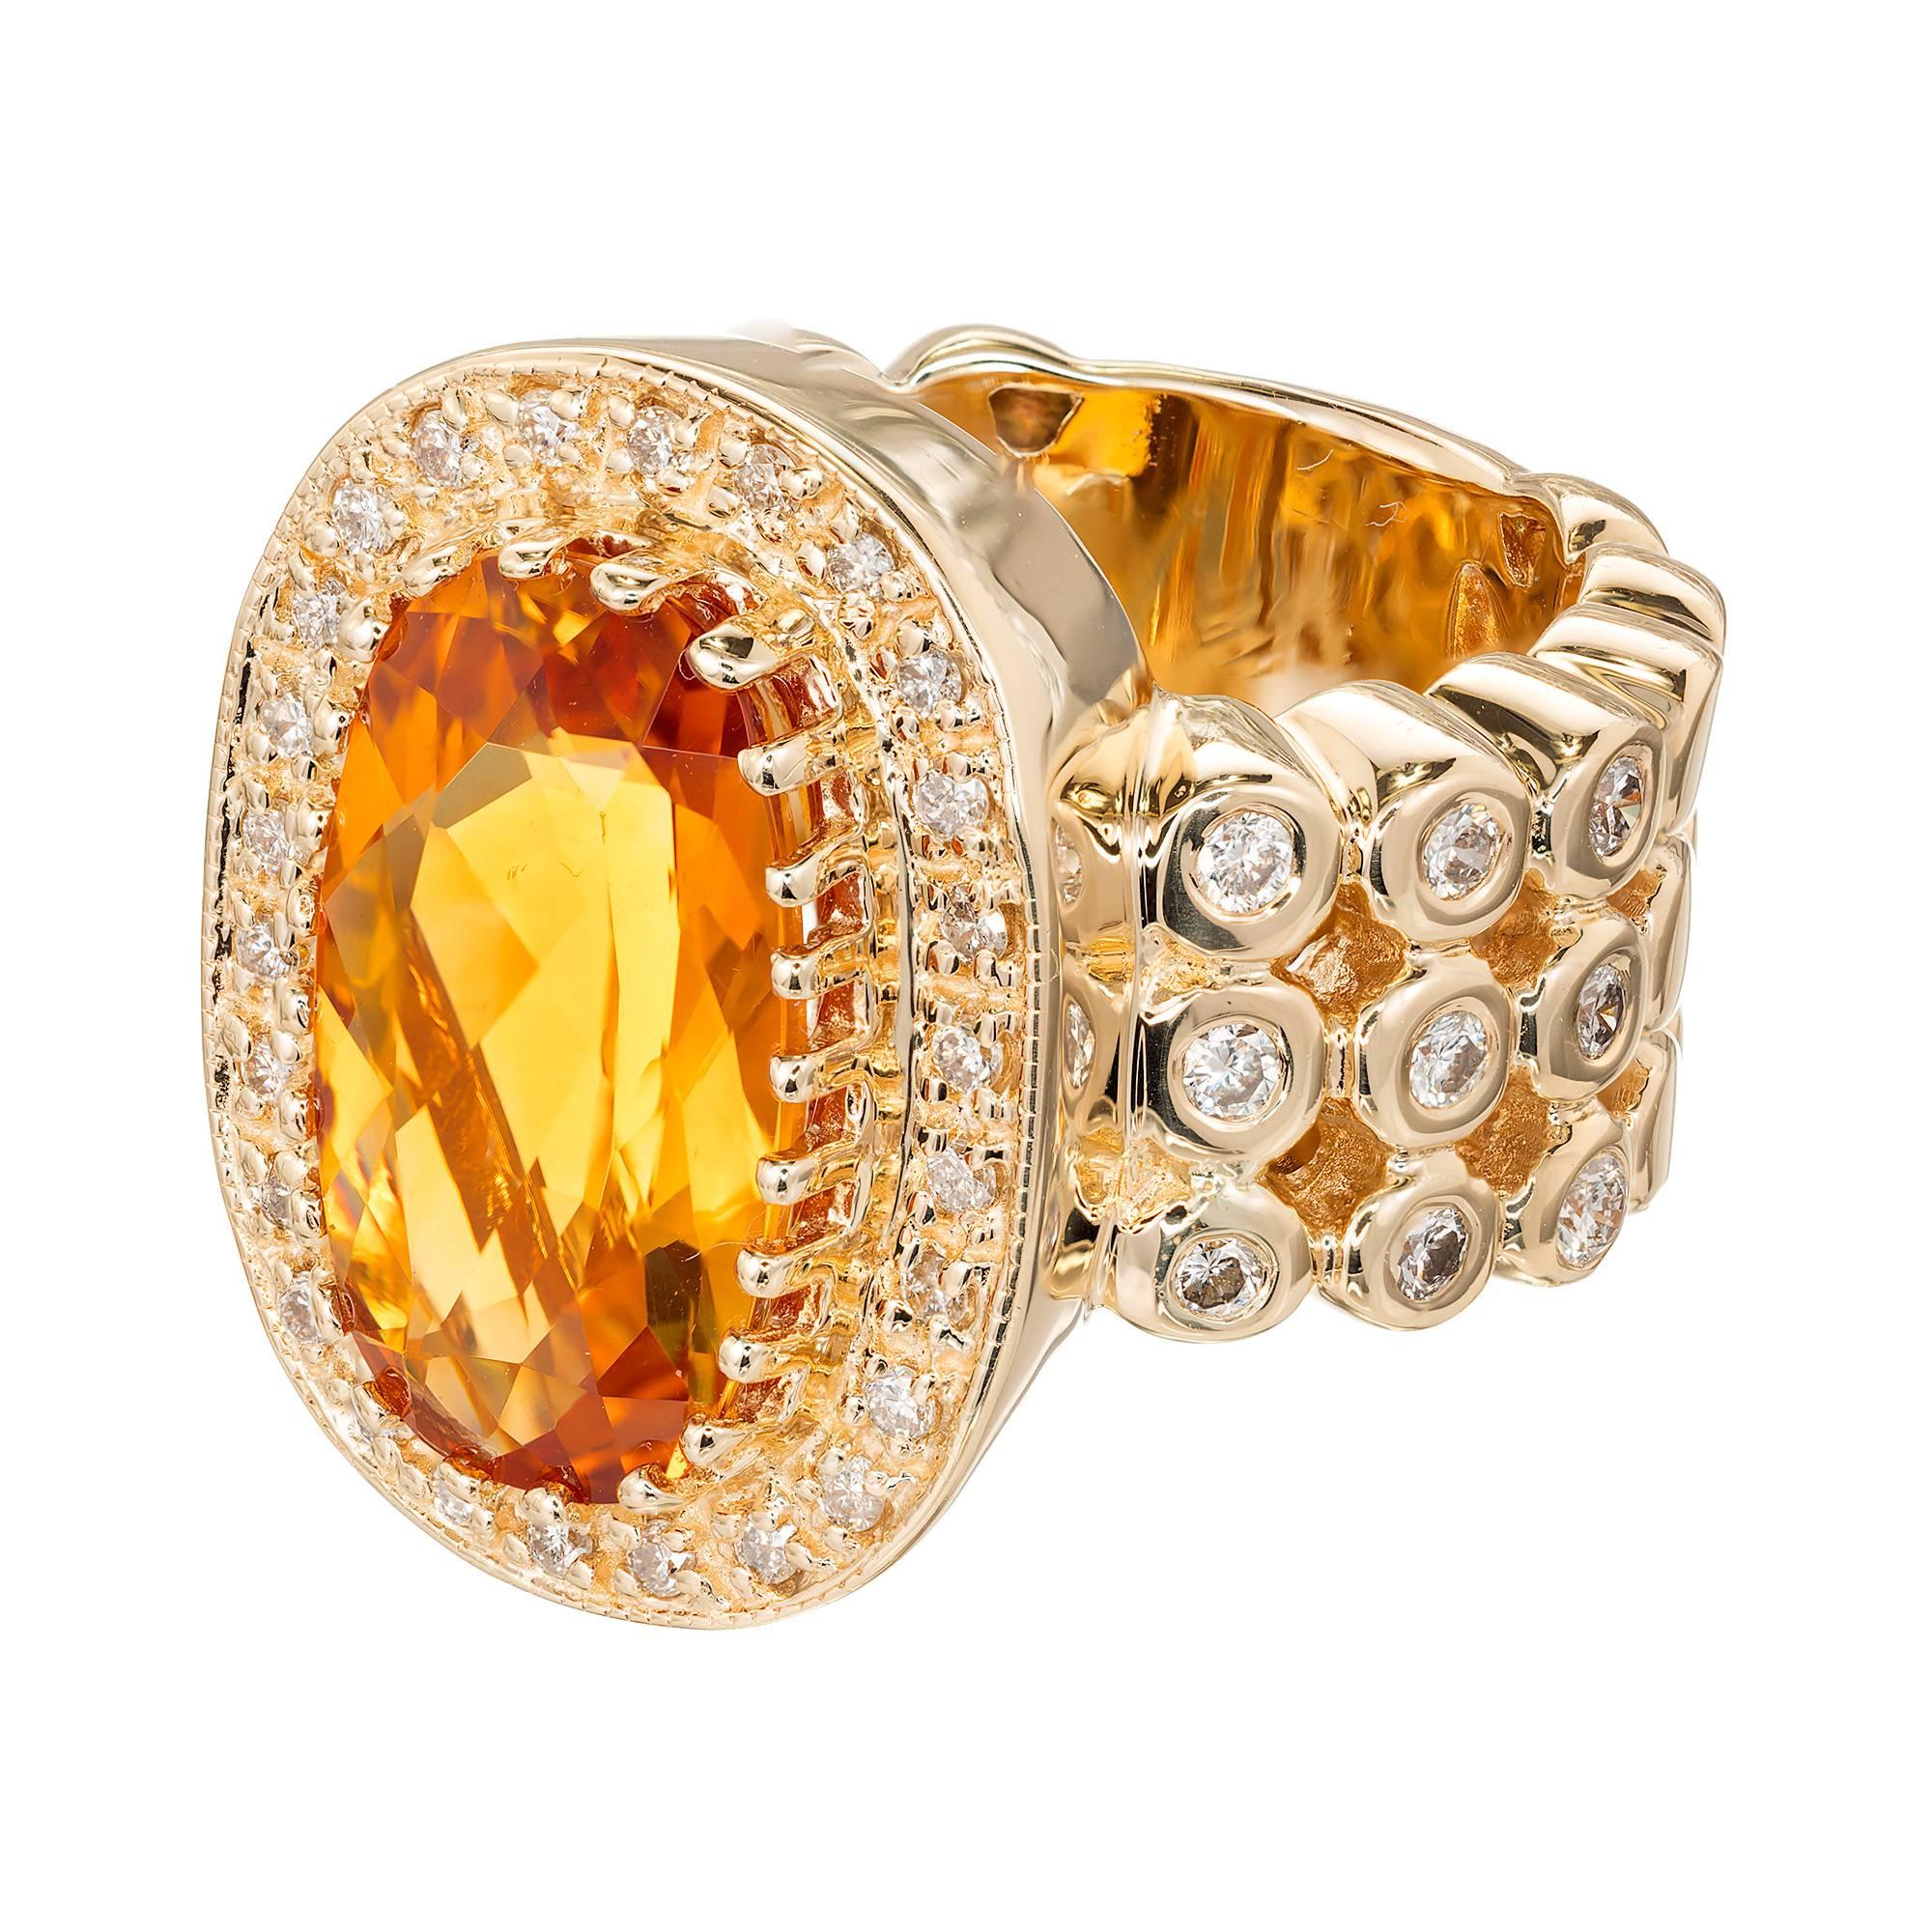 Authentic Sonia B golden yellow Citrine and bright white diamond large 14k gold cocktail ring.

1 oval fine Citrine 15.5 x 10 x 5.8mm, approx. total weight 6.0cts
44 full cut diamonds approx. total weight .71cts, G, VS2-SI1
Size 6 1/2 and